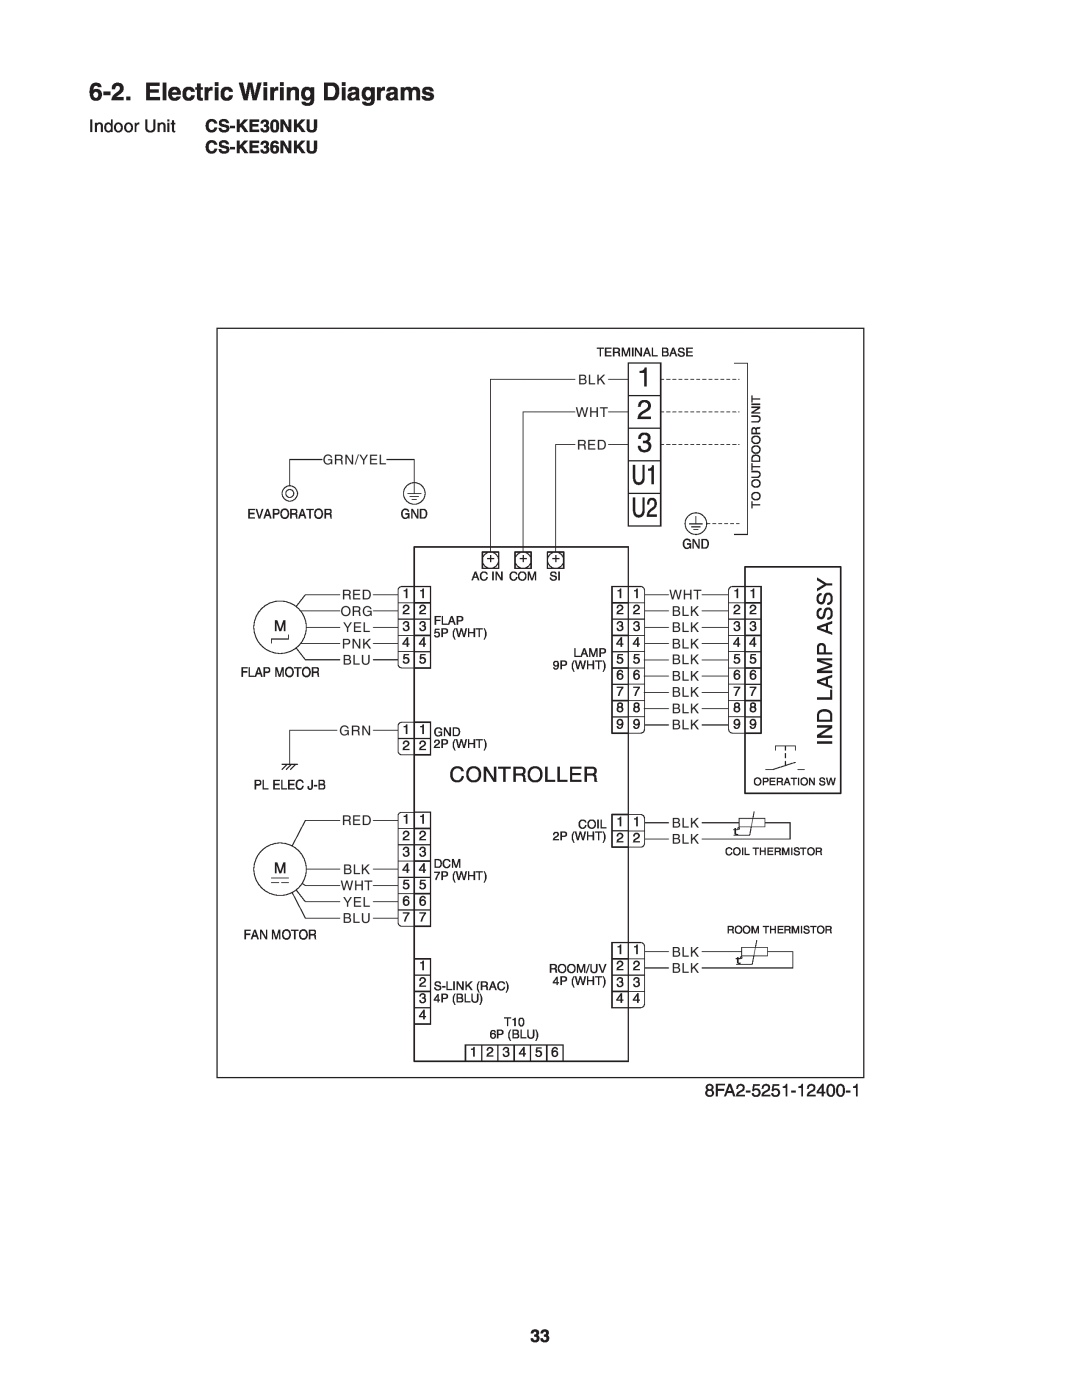 Panasonic CU-KE30NKU, CU-KE36NKU, CS-KE36NKU, CS-KE30NKU service manual Electric Wiring Diagrams, Controller 